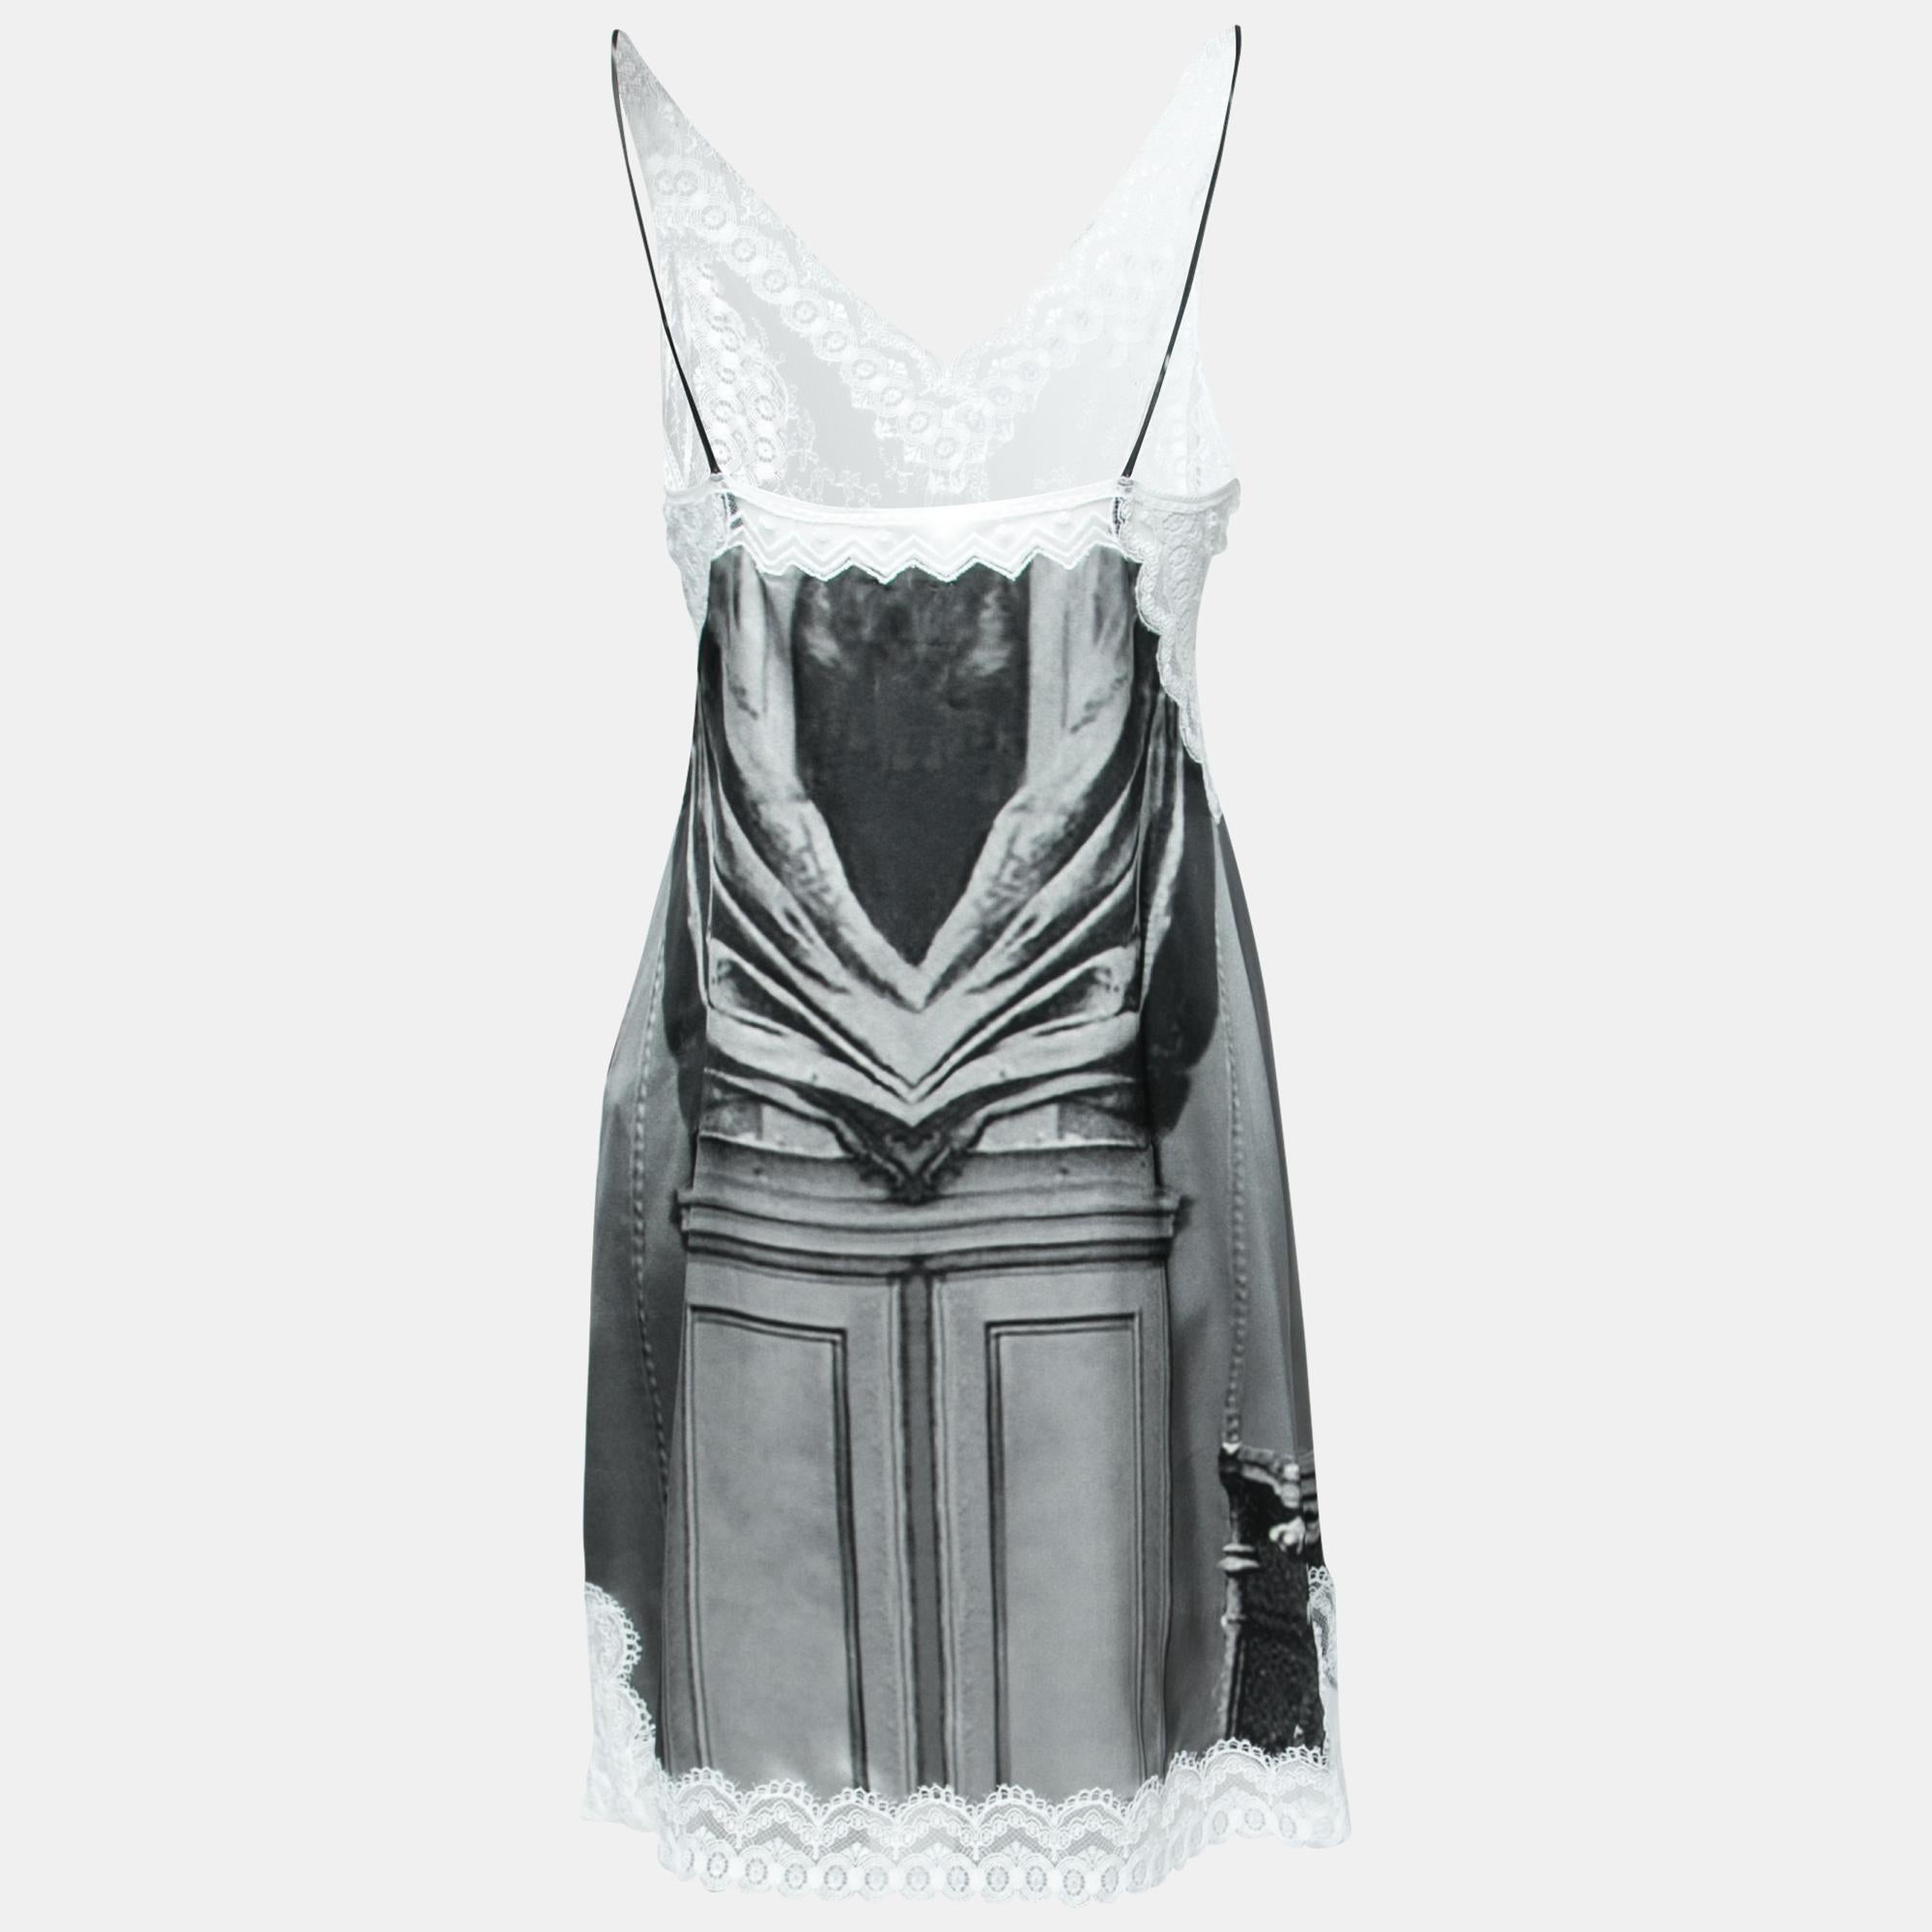 Burberry's incorporation of Victorian aesthetics with fine lacy installations makes dreams come true for so many fashion enthusiasts. In this gorgeous slip dress, you can witness a grey Victorian Portrait printed on the silk fabric, lace insets, and